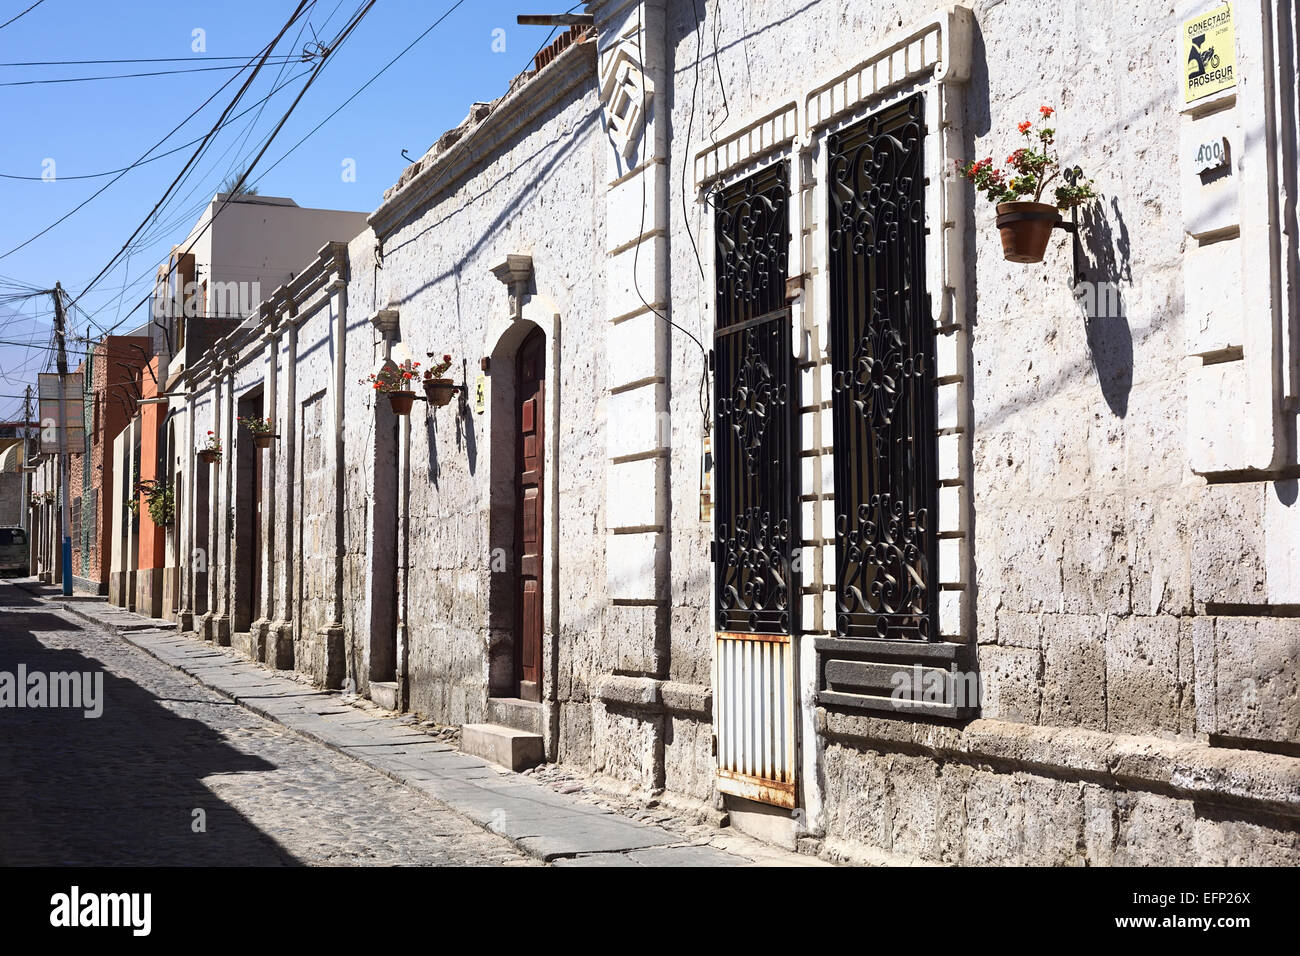 Typical houses built with sillar, the volcanic rock, on Tacna street in the district of Yanahuara in Arequipa, Peru Stock Photo